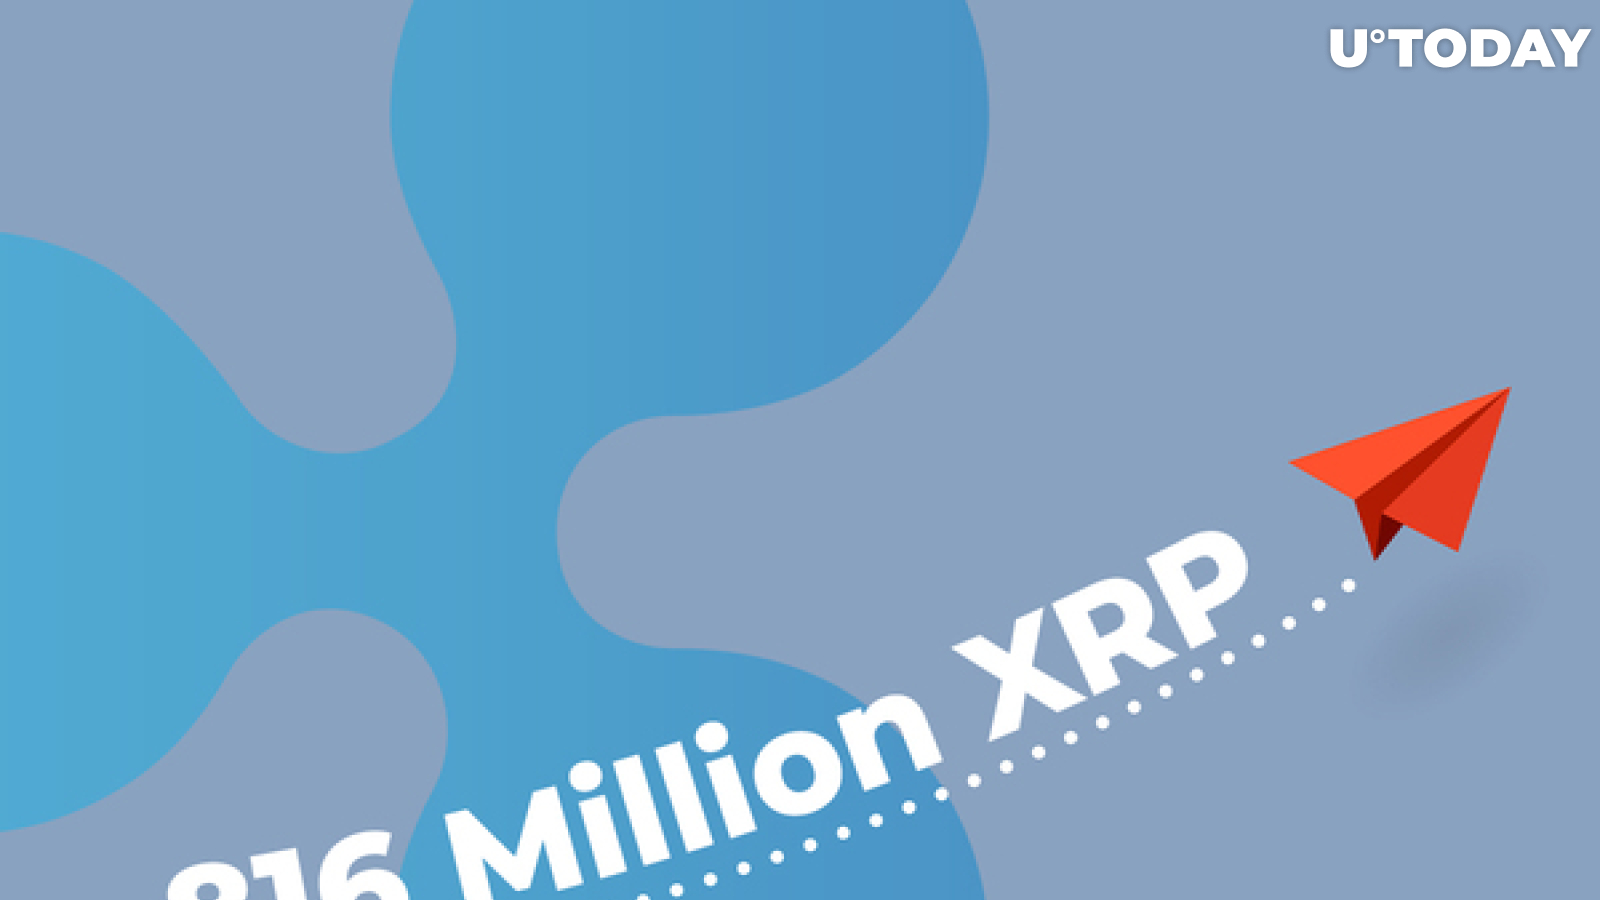 Ripple Shifts 816 Million XRP Along with Major XRP "Delister," While Coin Holds at $0.55